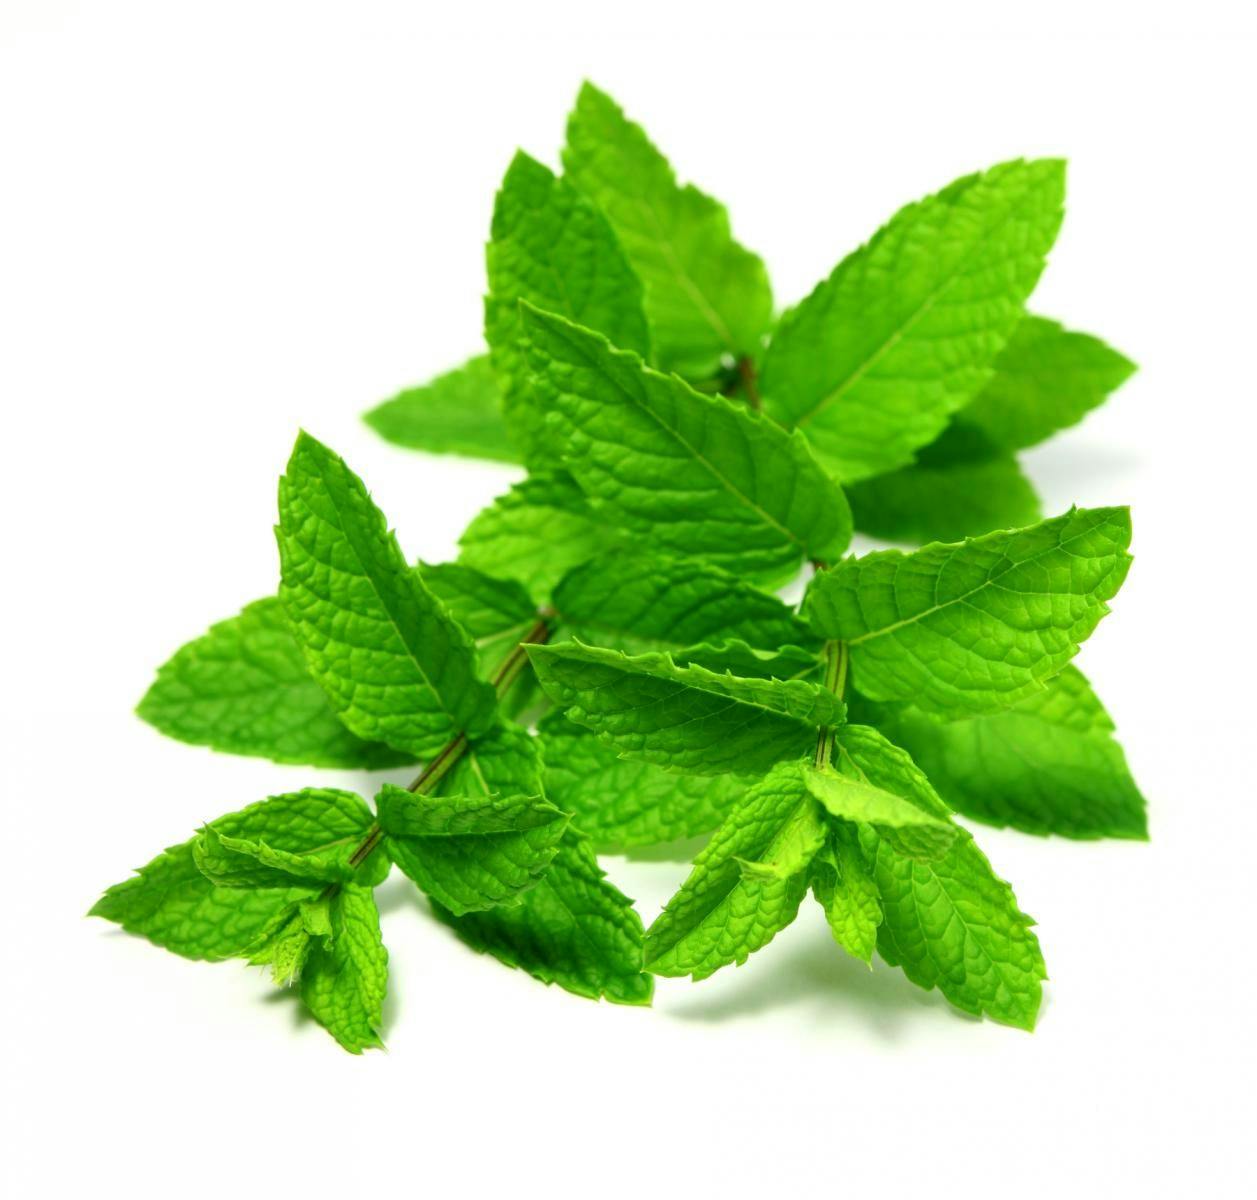 SupplySide West: New Spearmint Ingredient for Brain Health, Plus Sustainable Rosemary